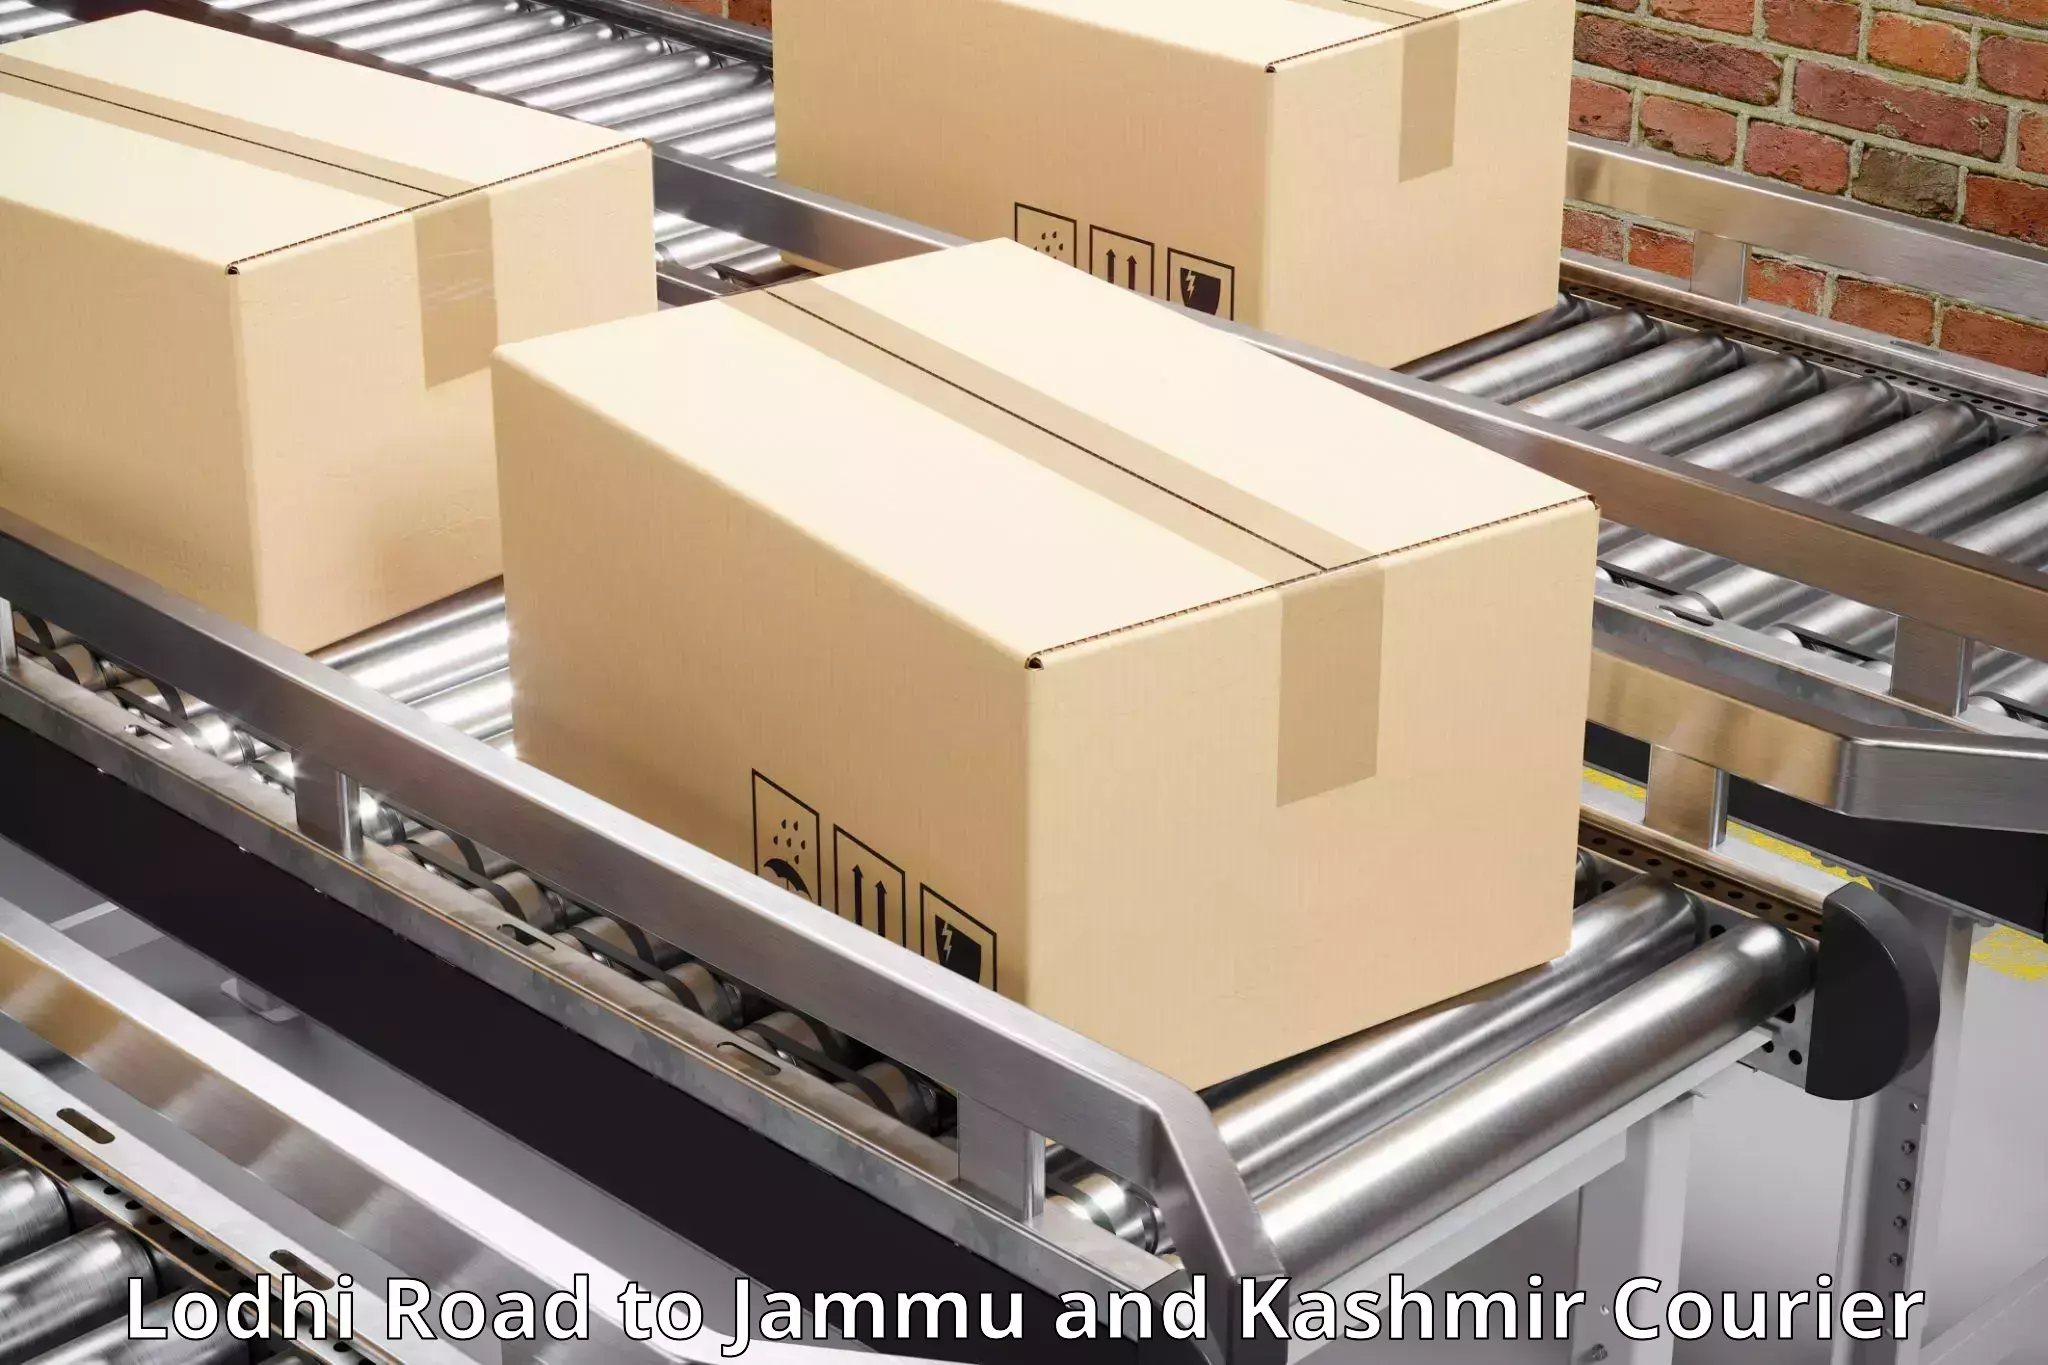 Heavy parcel delivery Lodhi Road to Anantnag